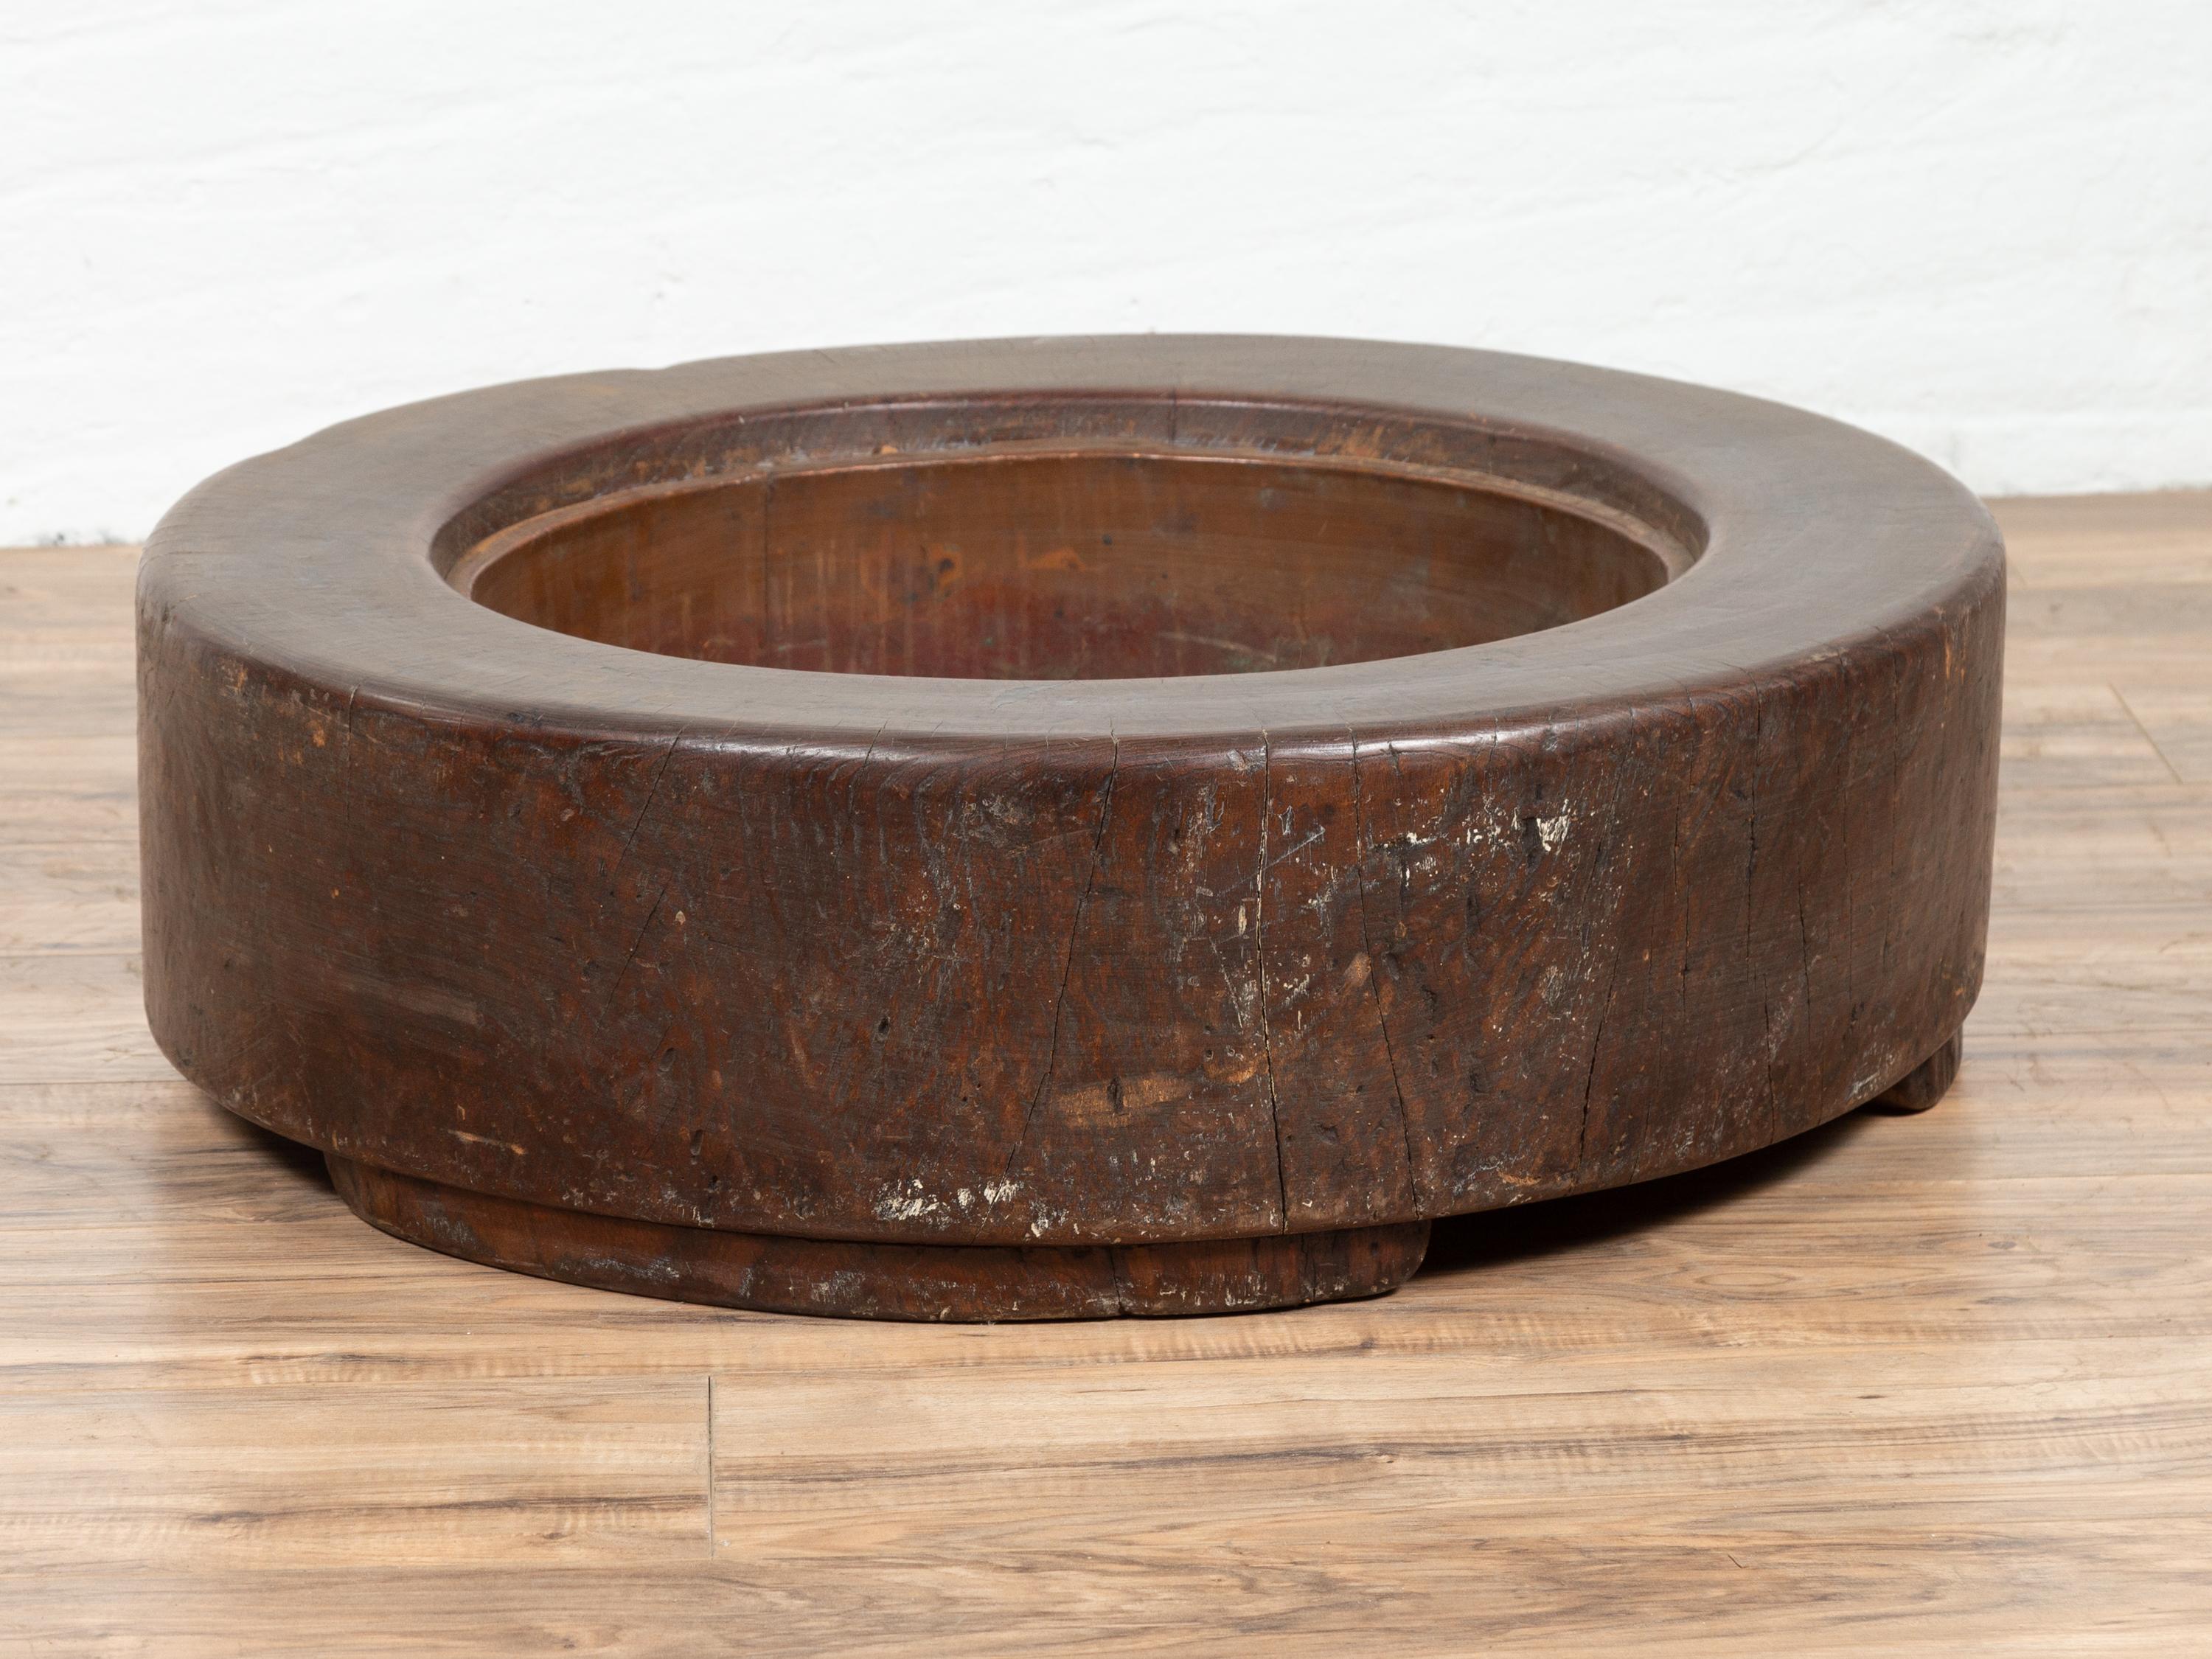 Meiji Period Japanese Wood Root Round Hibachi with Brown Patina, circa 1900 In Good Condition For Sale In Yonkers, NY